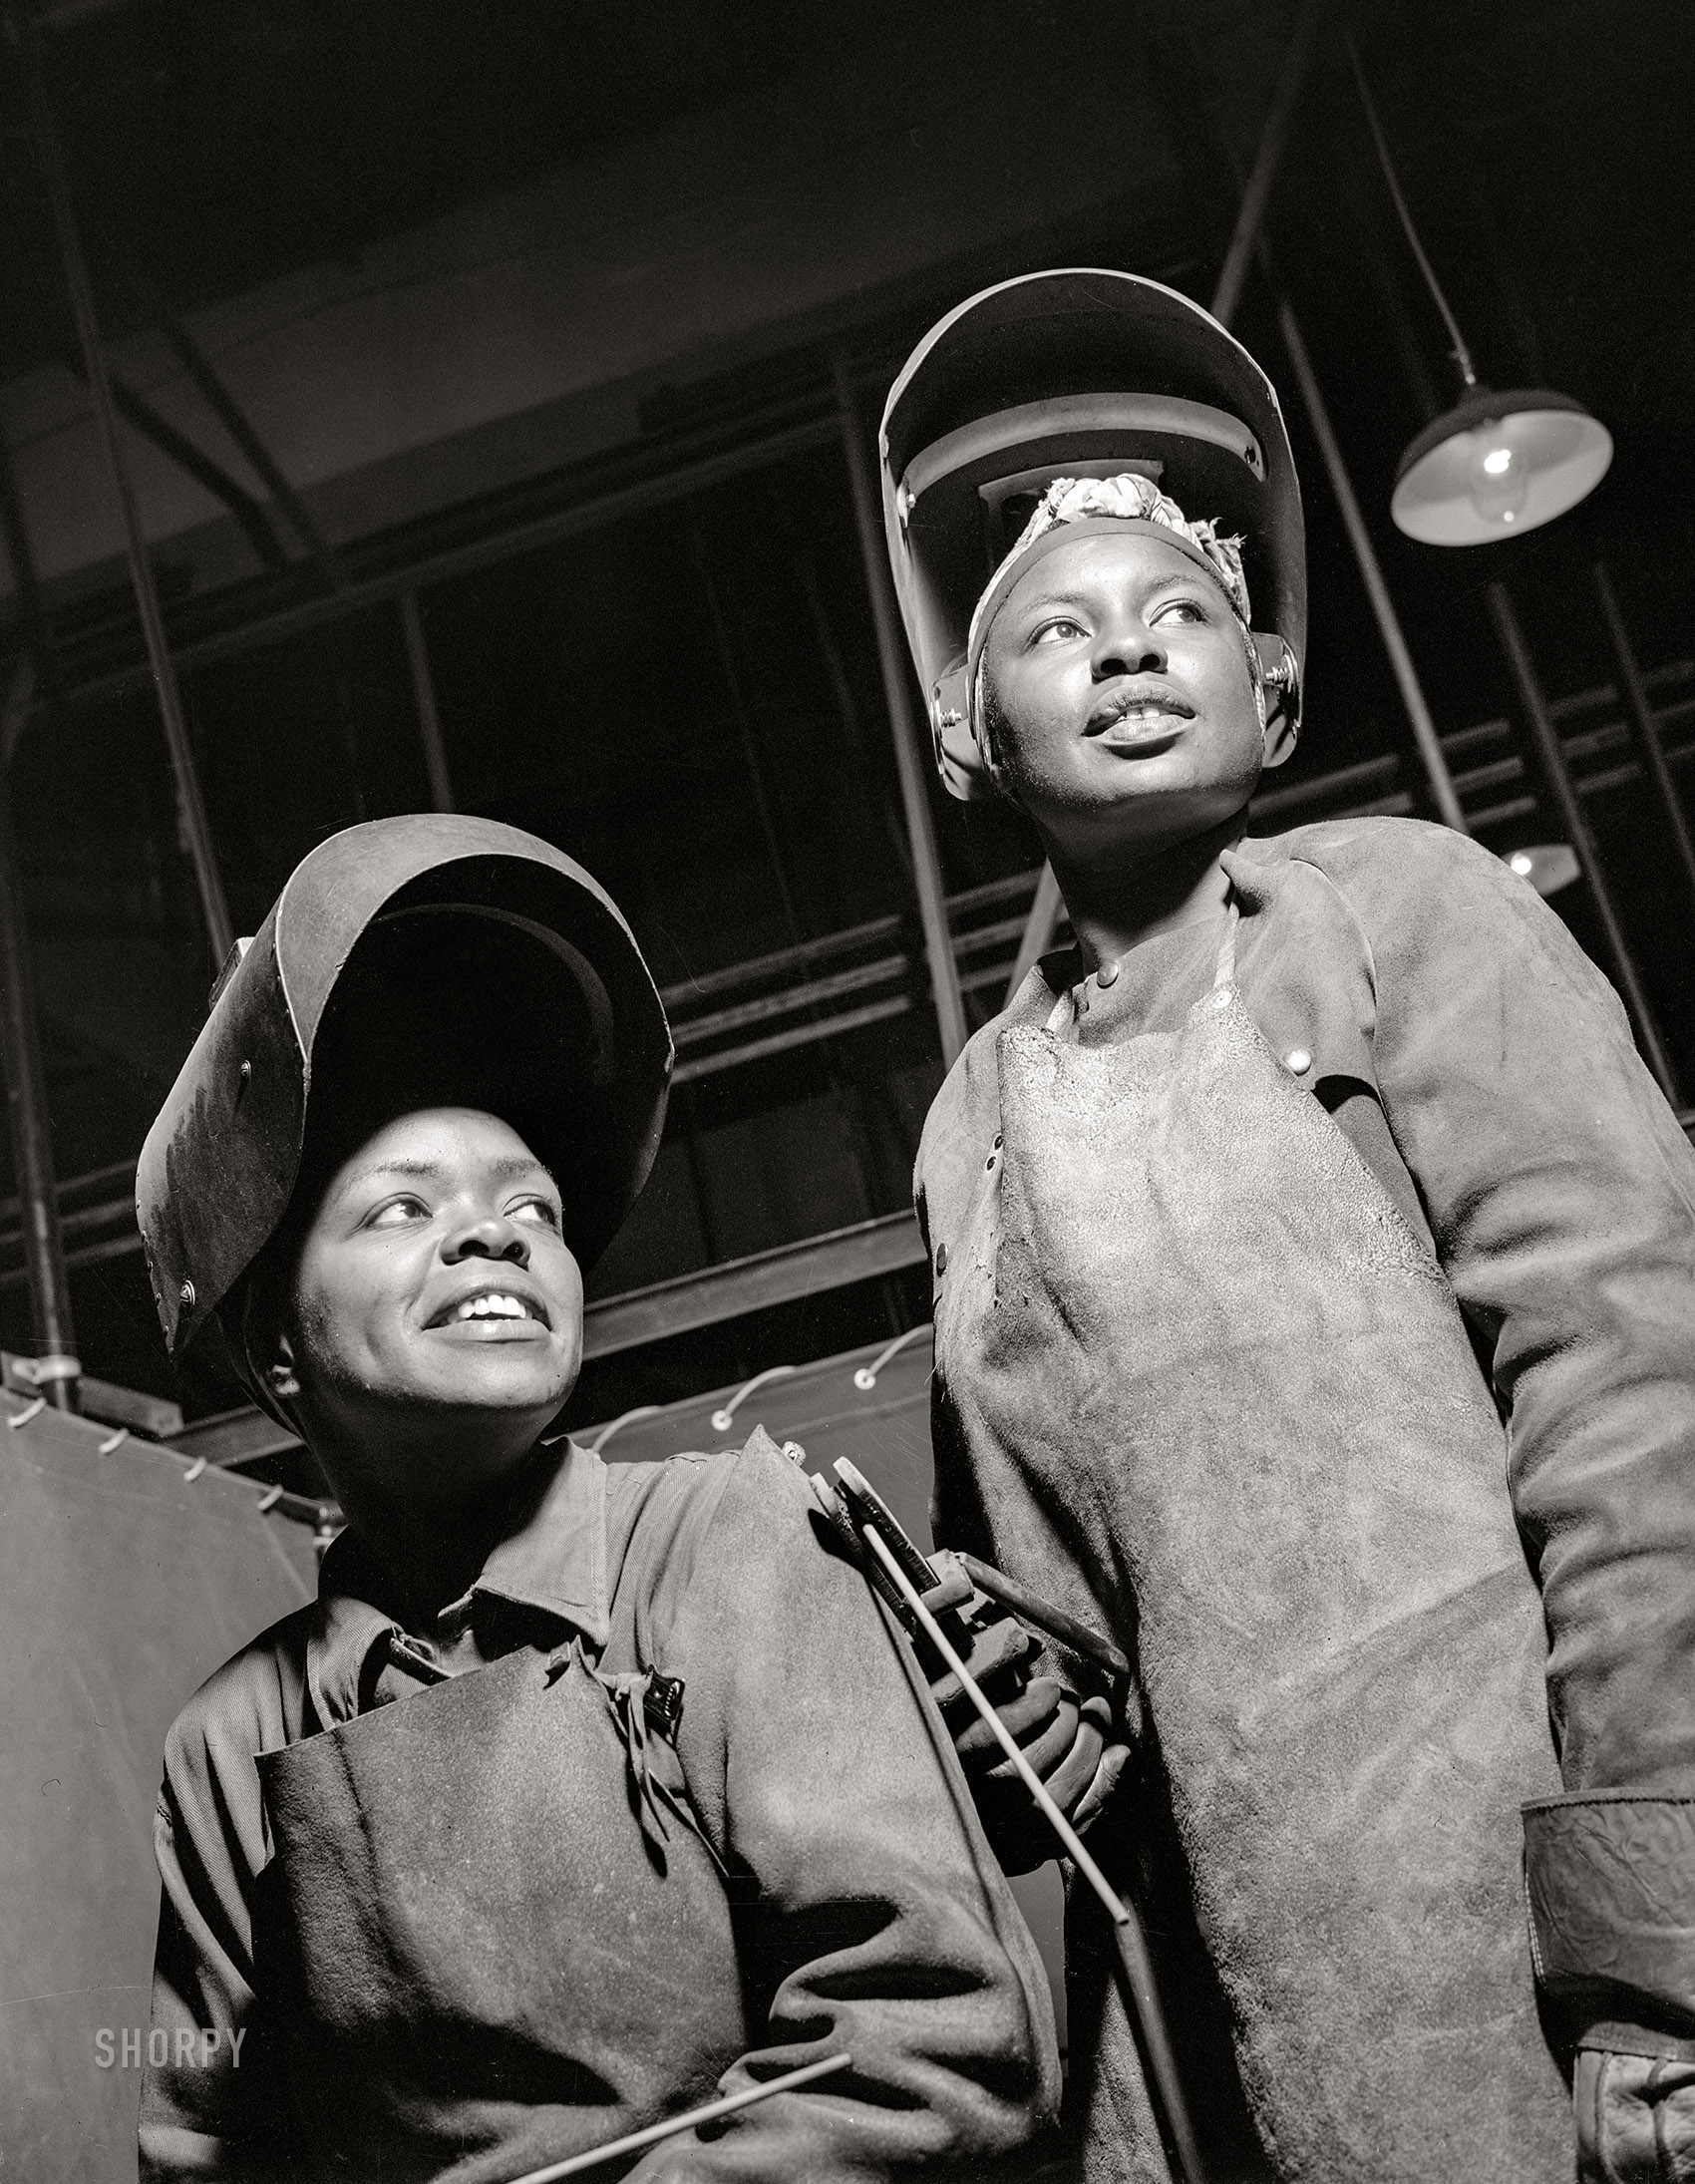 June 1943. "New Britain, Connecticut. Women welders at the Landers, Frary, and Clark plant." Acetate negative by Gordon Parks for the Office of War Information. View full size.